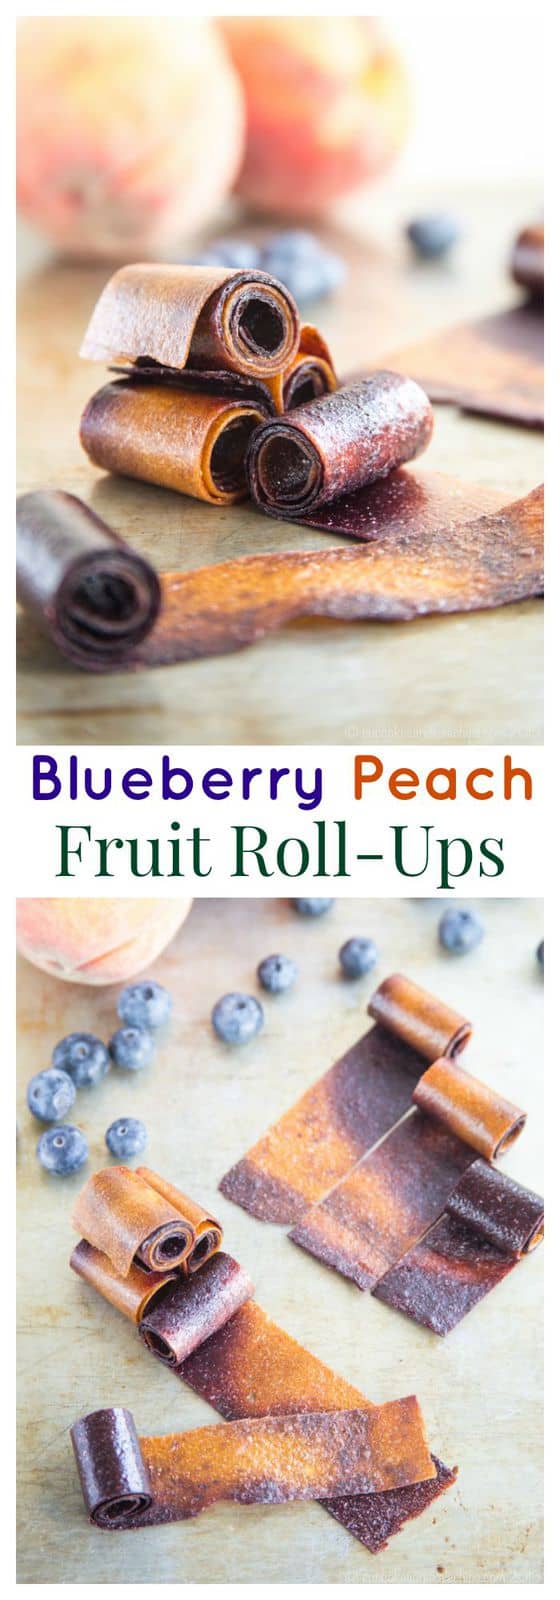 Blueberry Peach Fruit Roll-Ups swirl together two favorite summer fruits into one sweet and healthy snack perfect to pack in a lunchbox. | cupcakesandkalechips.com | gluten free, vegan, paleo recipe